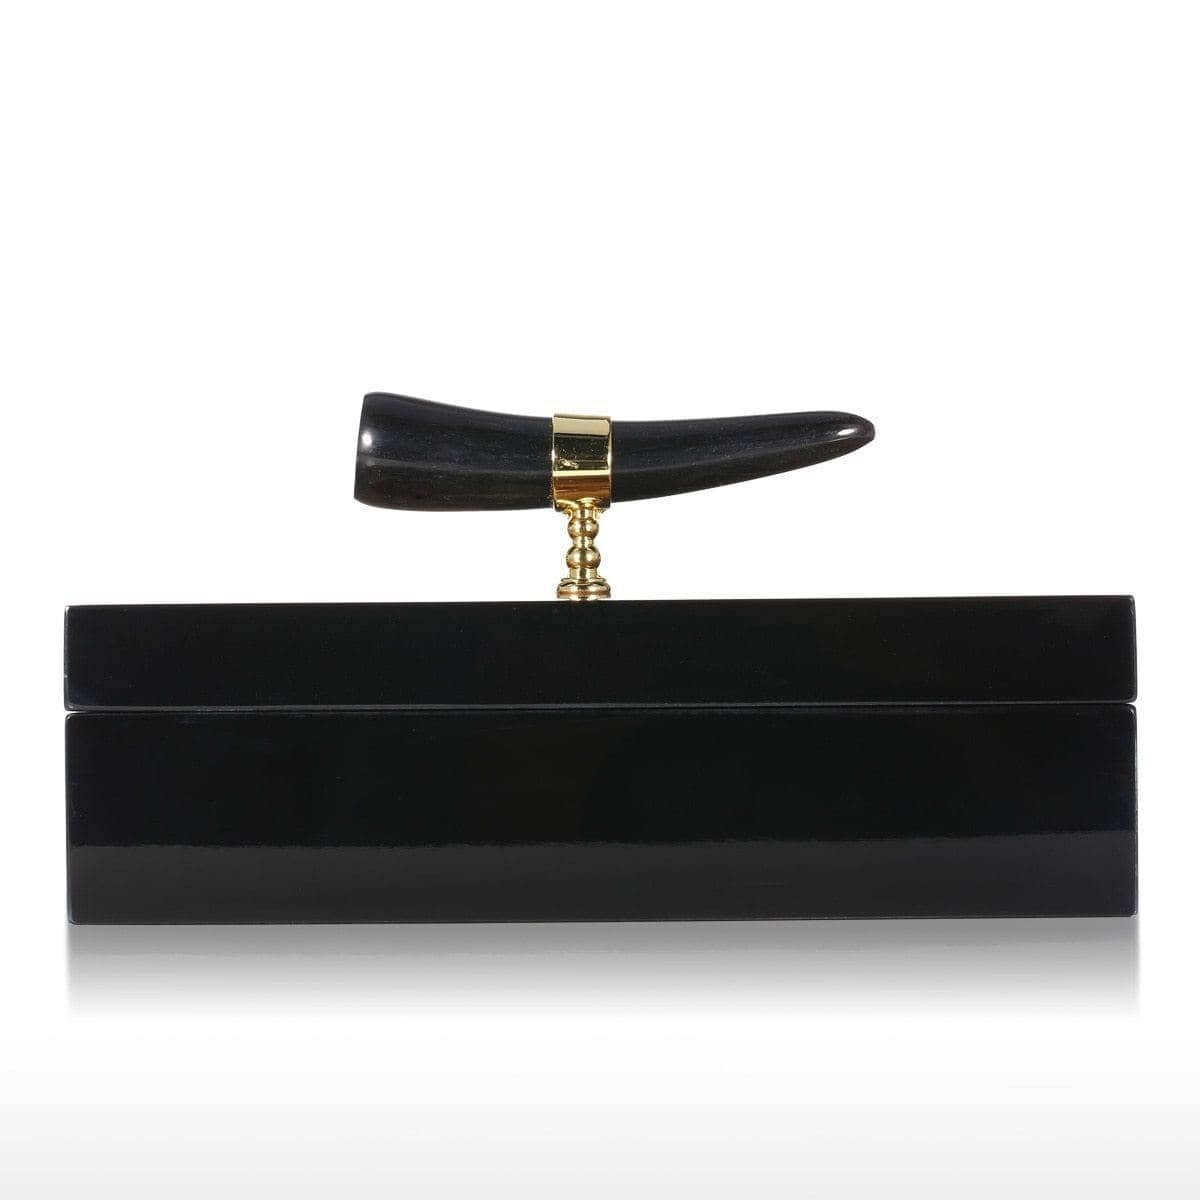 Horn Stripe Jewelry Organizer: Stylish and Chic Storage Solution for Accessories